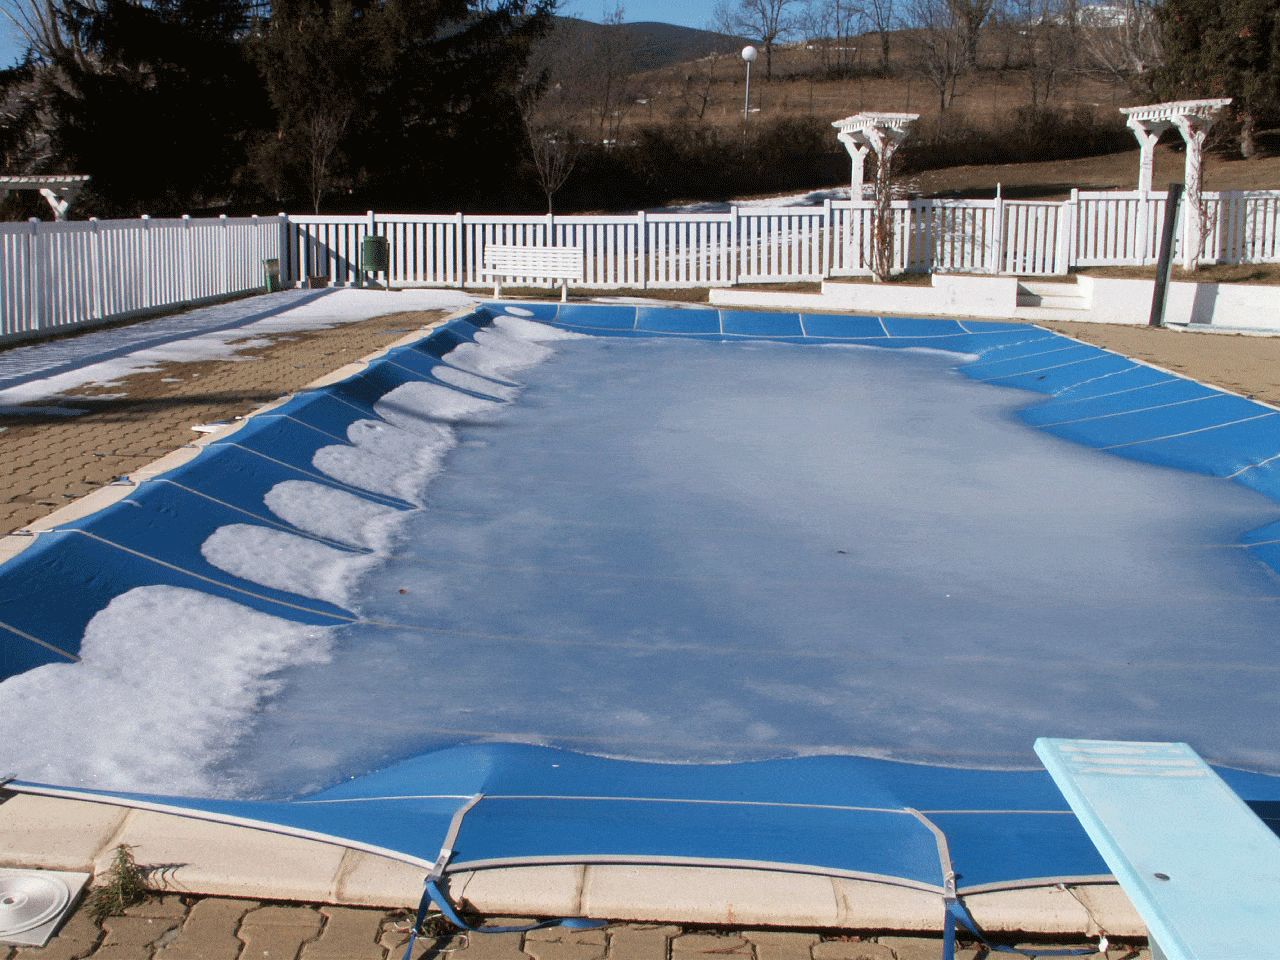 Freeze Prevention: How to Prepare Your Pool for Winter